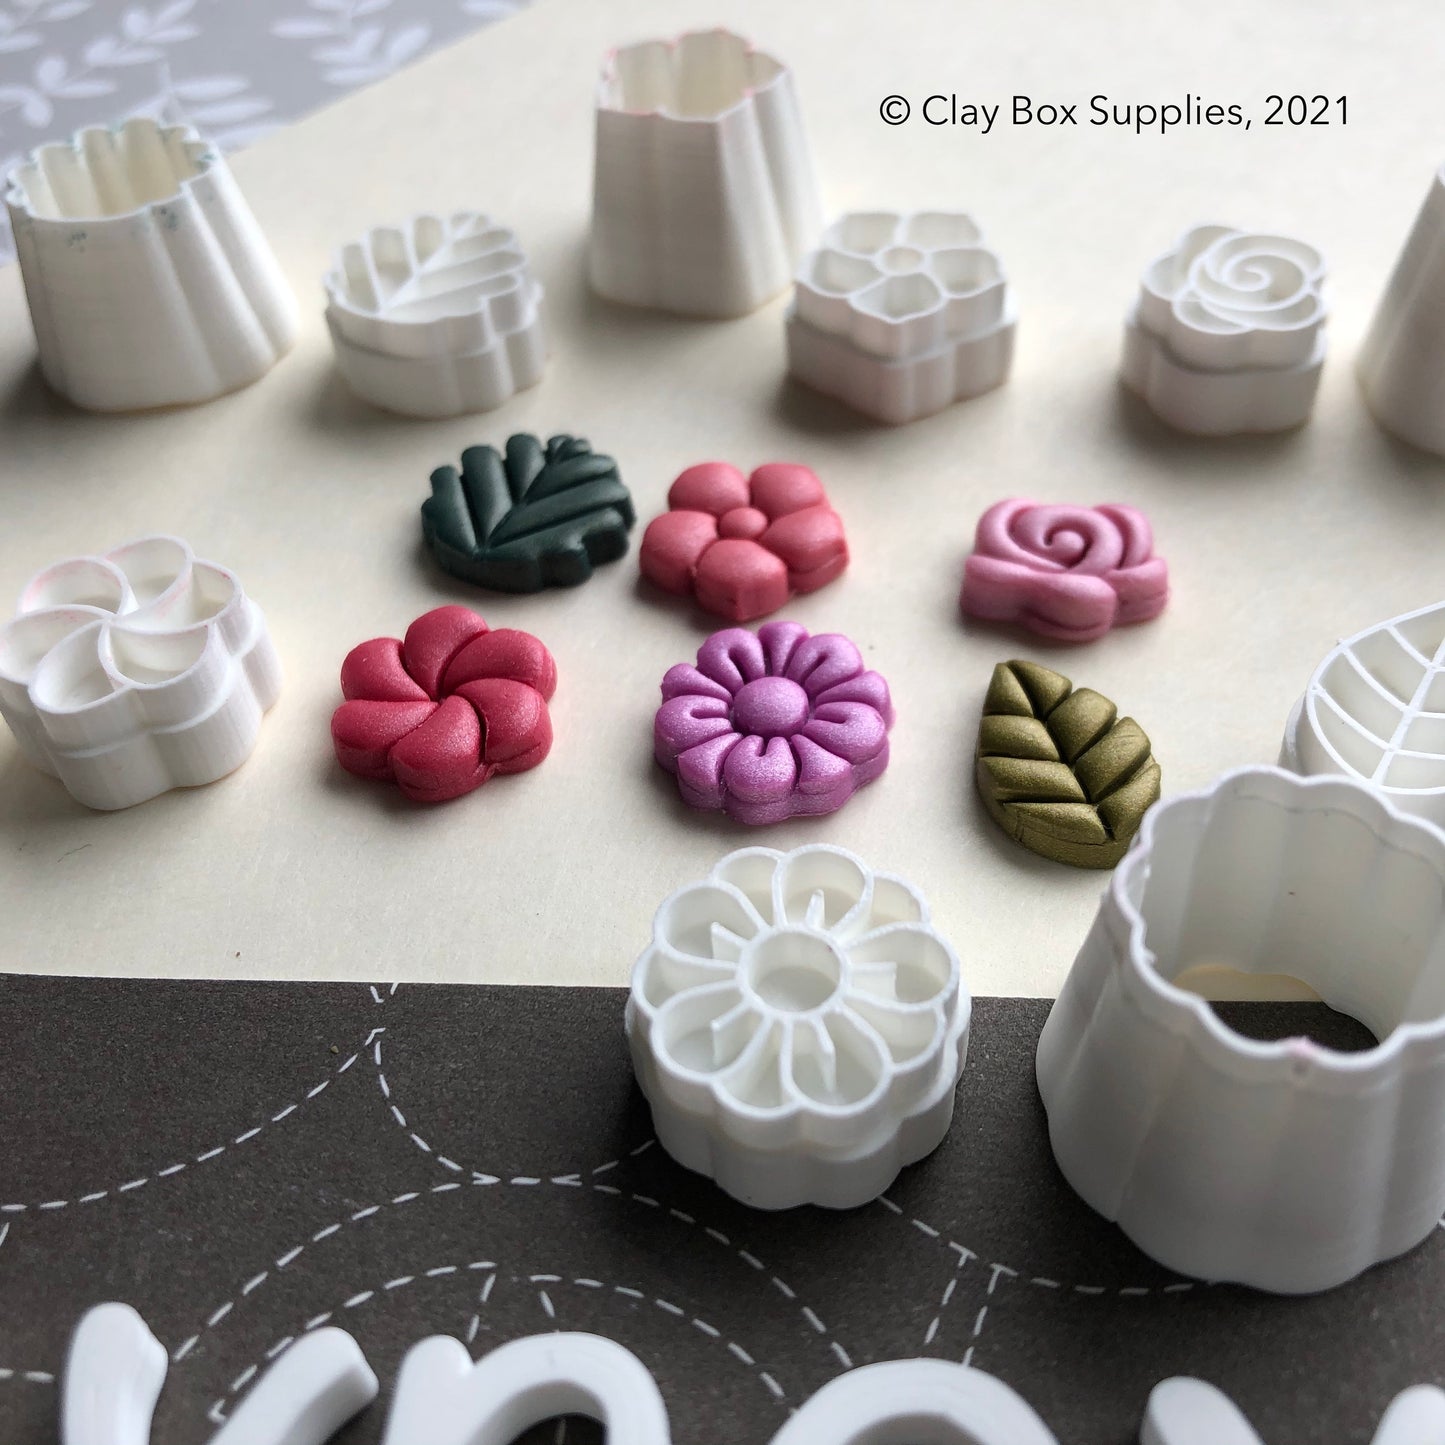 Tiny flower (Set 1) stamps and cutters - made for use with polymer clay